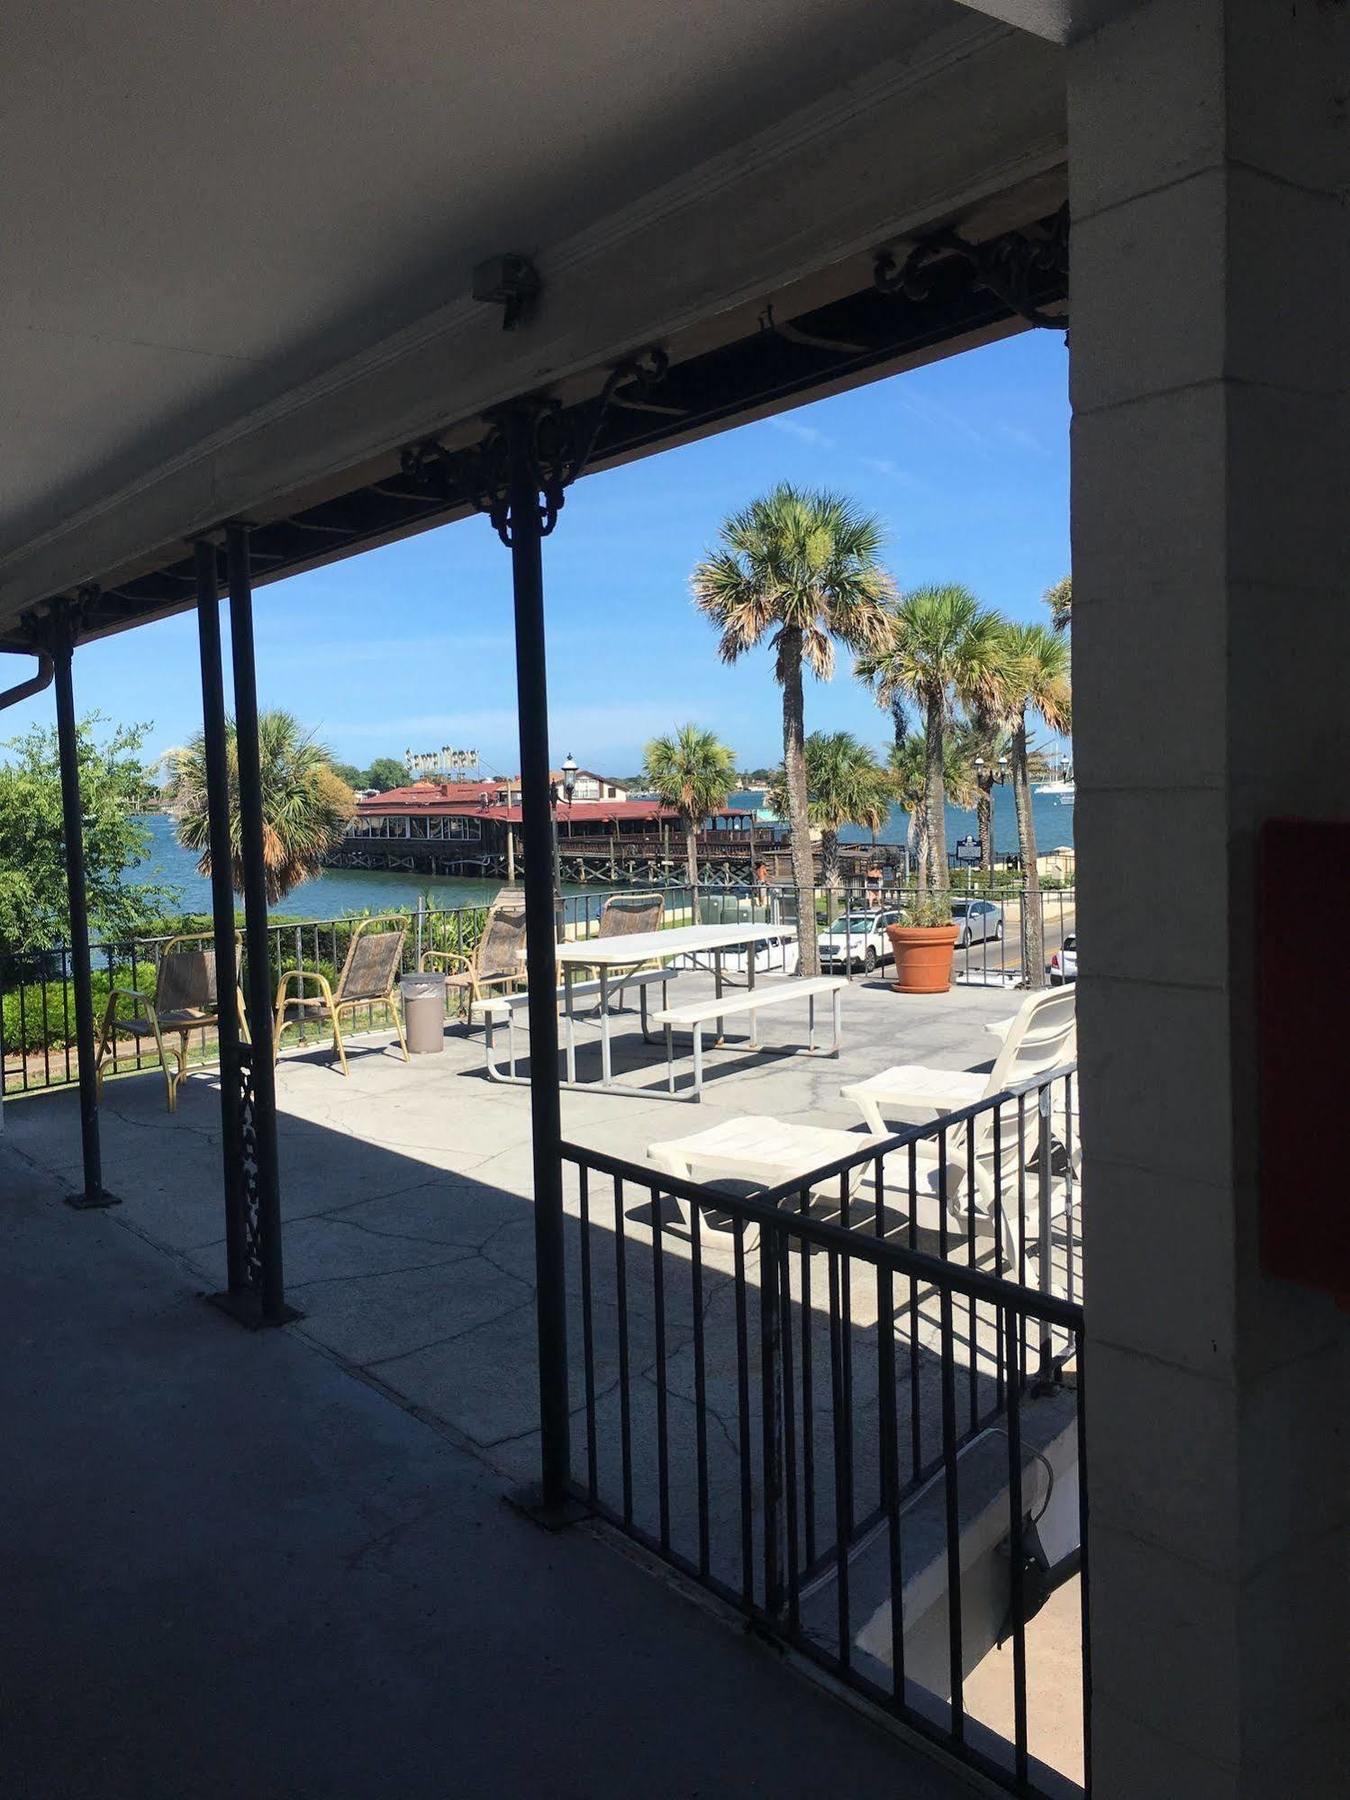 Historic Waterfront Marion Motor Lodge In Downtown St Augustine St. Augustine Exterior foto